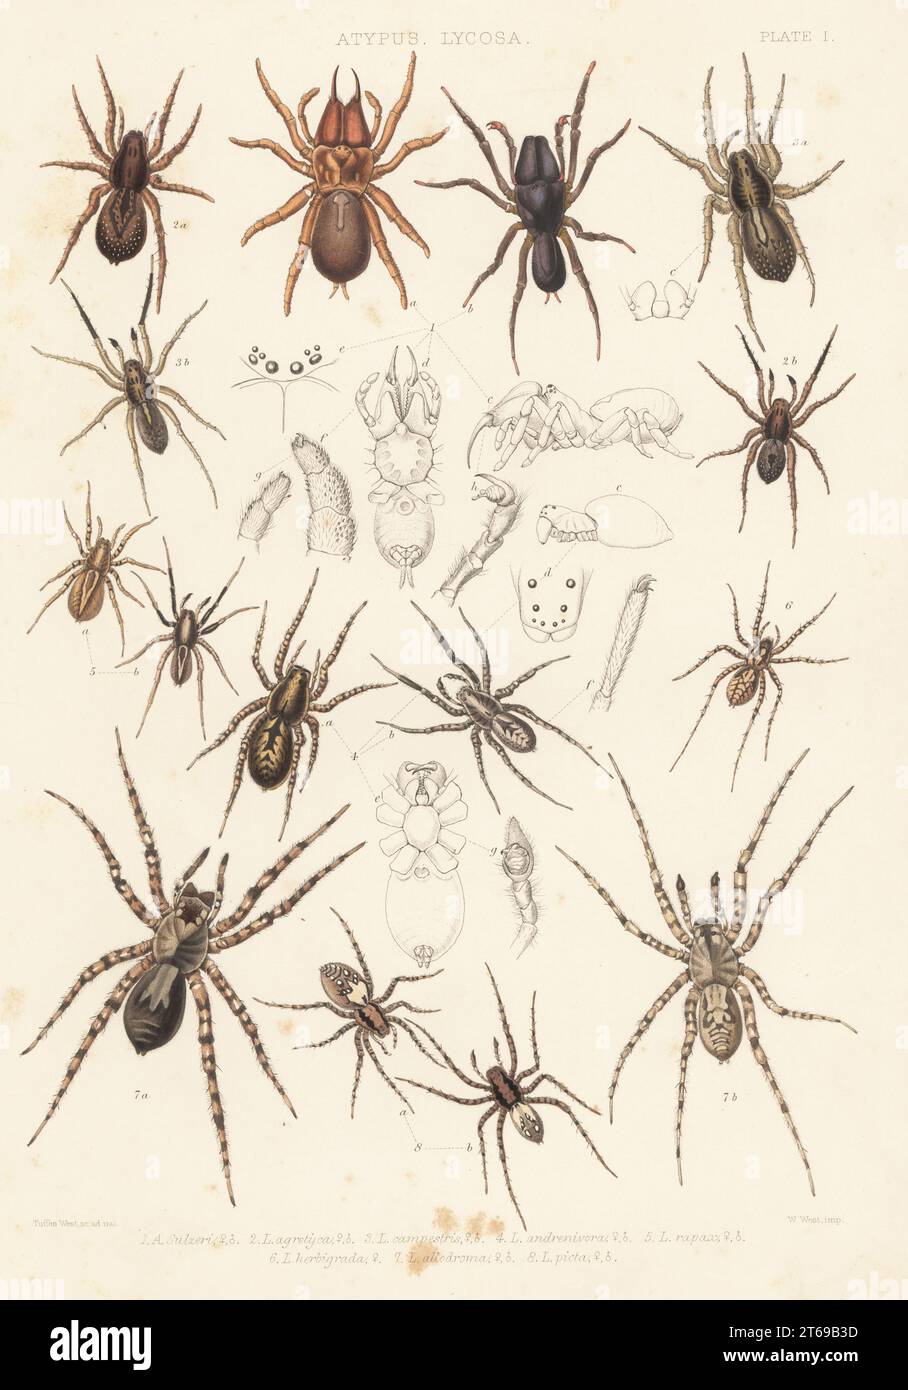 Purse web spider, Atypux affinis 1, ground wolf spider, Trochosa terricola 2, rustic wolf spider, Trochosa ruricola 3, wolf spider, Alopecosa accentuata 4, Alopecosa pulverulenta 5, Pardosa palustris 6, Arctosa cinerea 7 and sand bear spider, Arctosa perita 8. Handcoloured lithograph by W. West after Tuffen West from John Blackwalls A History of the Spiders of Great Britain and Ireland, Ray Society, London, 1861. Stock Photo